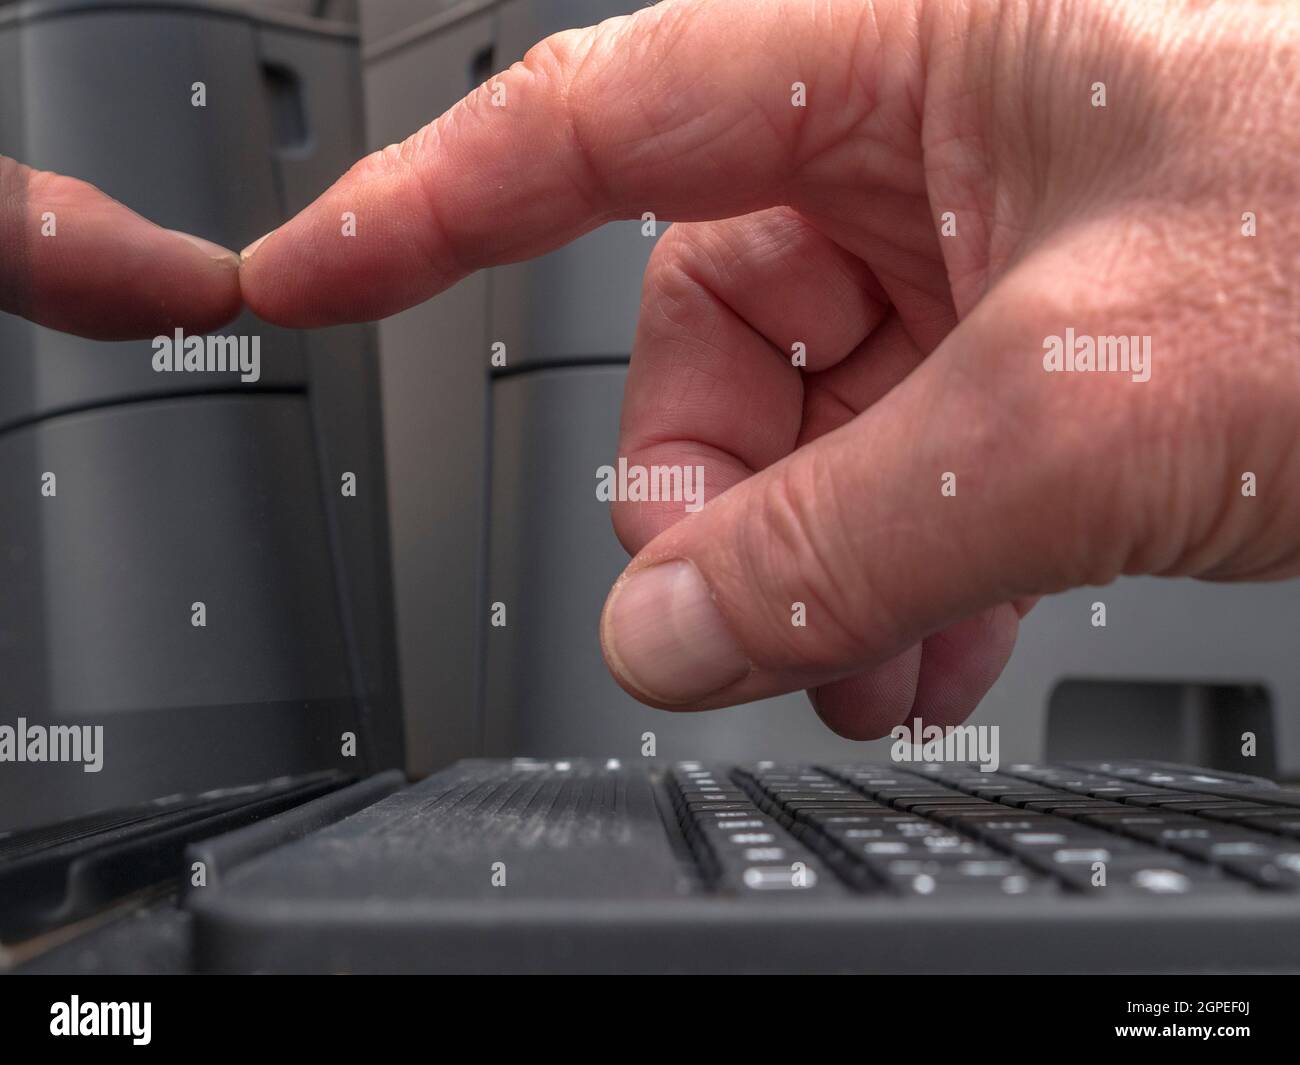 Closeup POV shot of a man’s finger tapping / touching a tablet screen / display, next to a portable keyboard, in front of a printer. Stock Photo